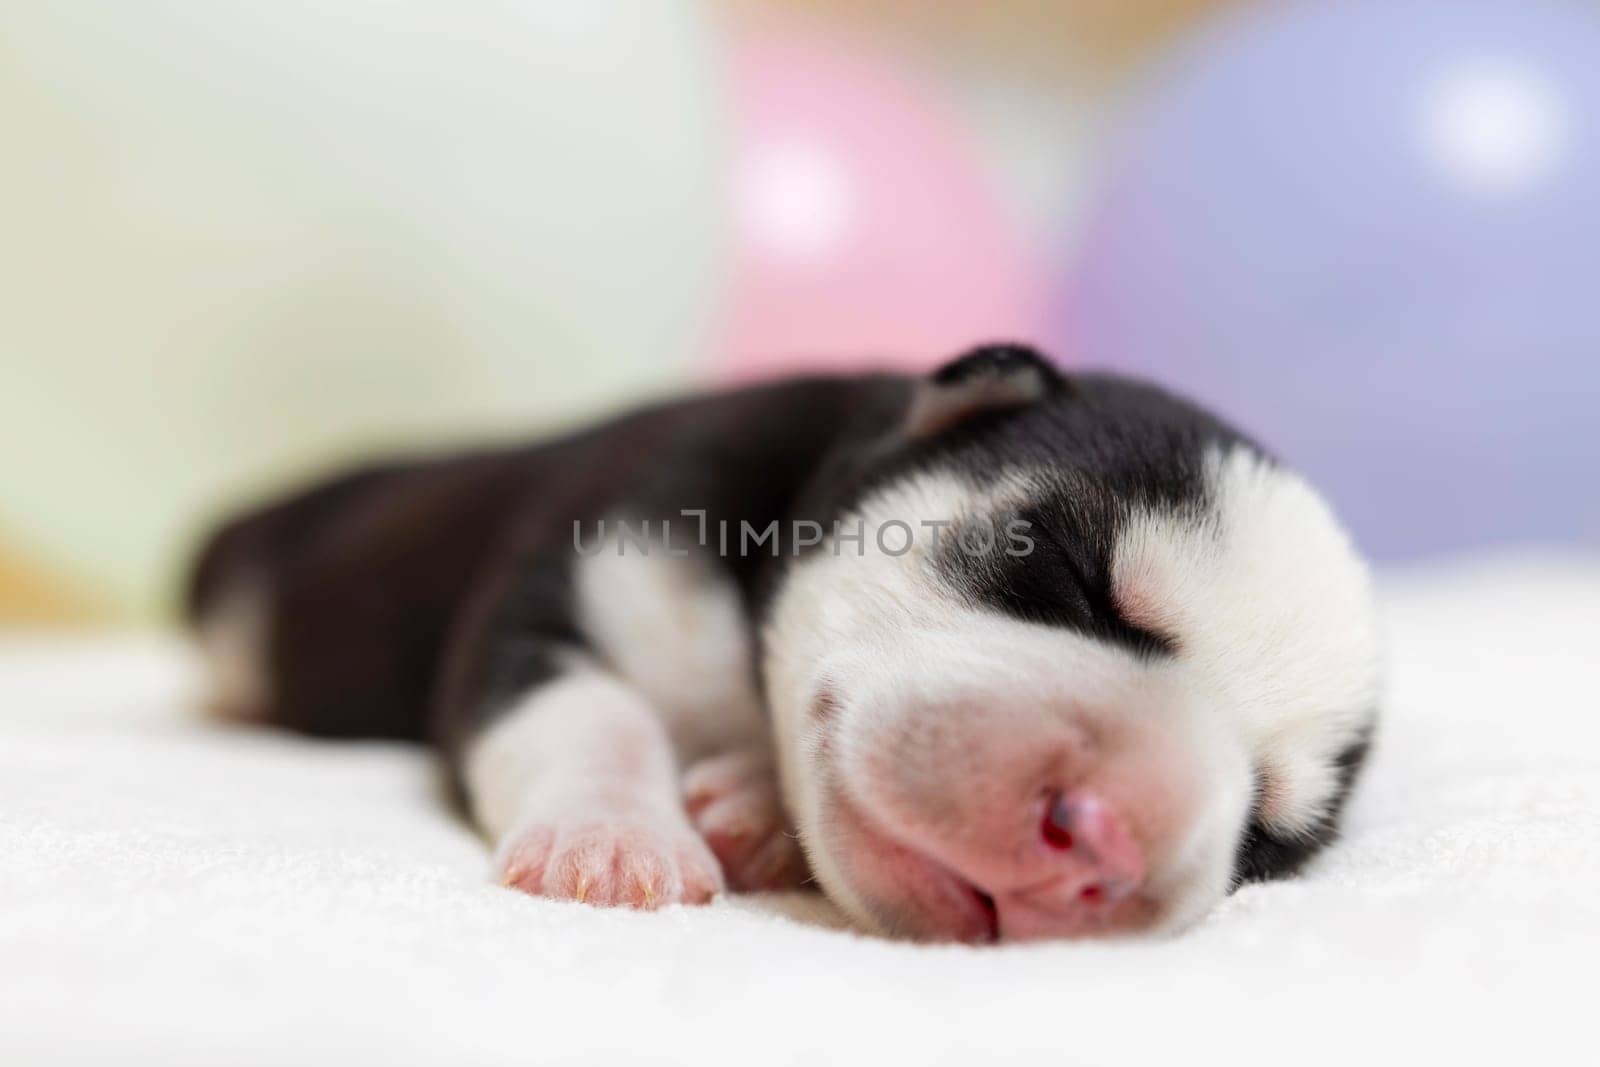 Newborn puppy sleeping peacefully on soft fabric. Studio pet portrait for greeting card or birth announcement with pastel balloons background.